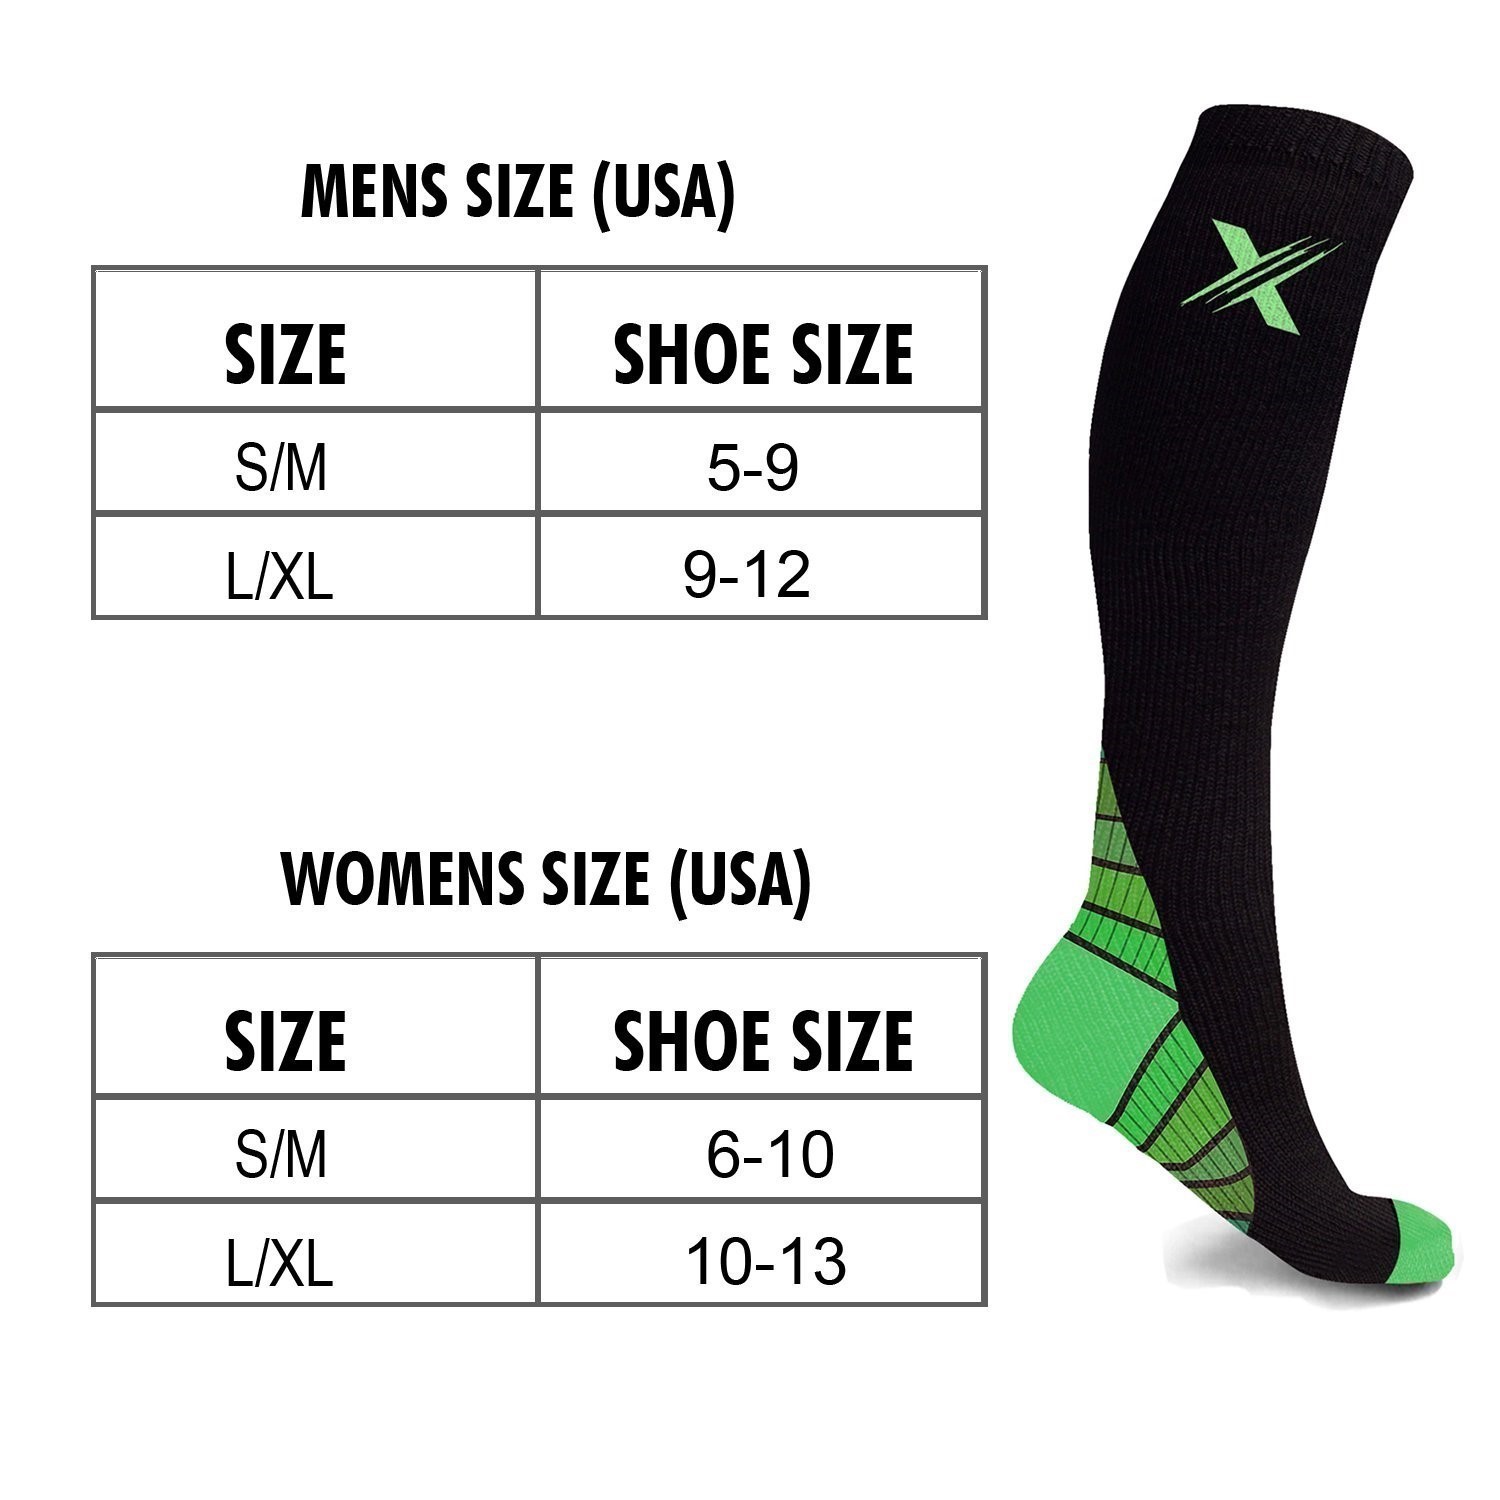 Unisex Sports Compression Socks - Made for Running, Athletics ...